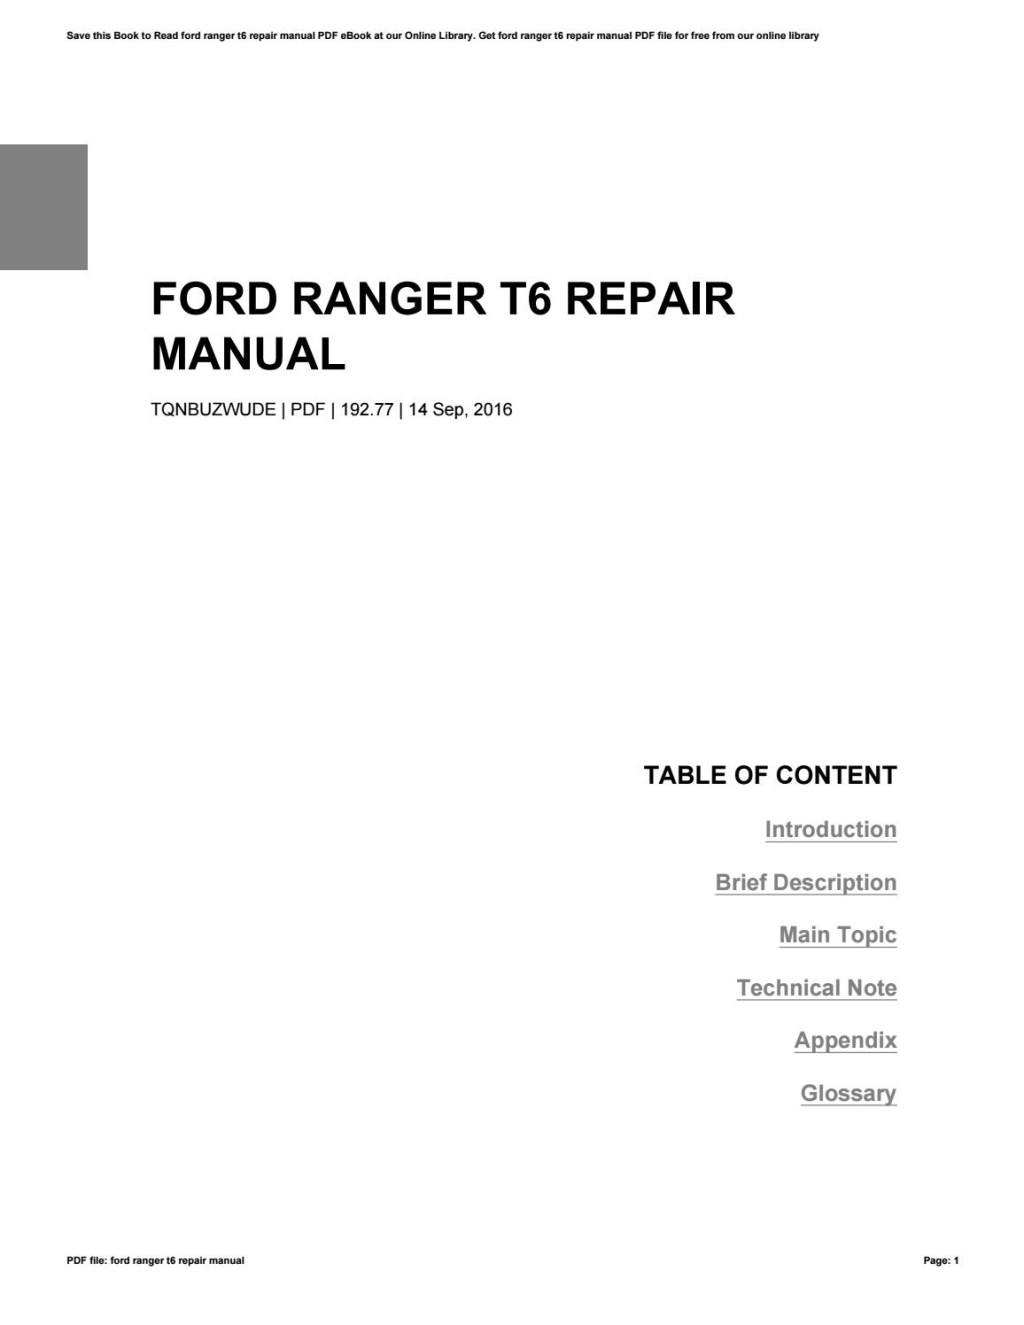 Picture of: Ford ranger t repair manual by ArthurRoss – Issuu